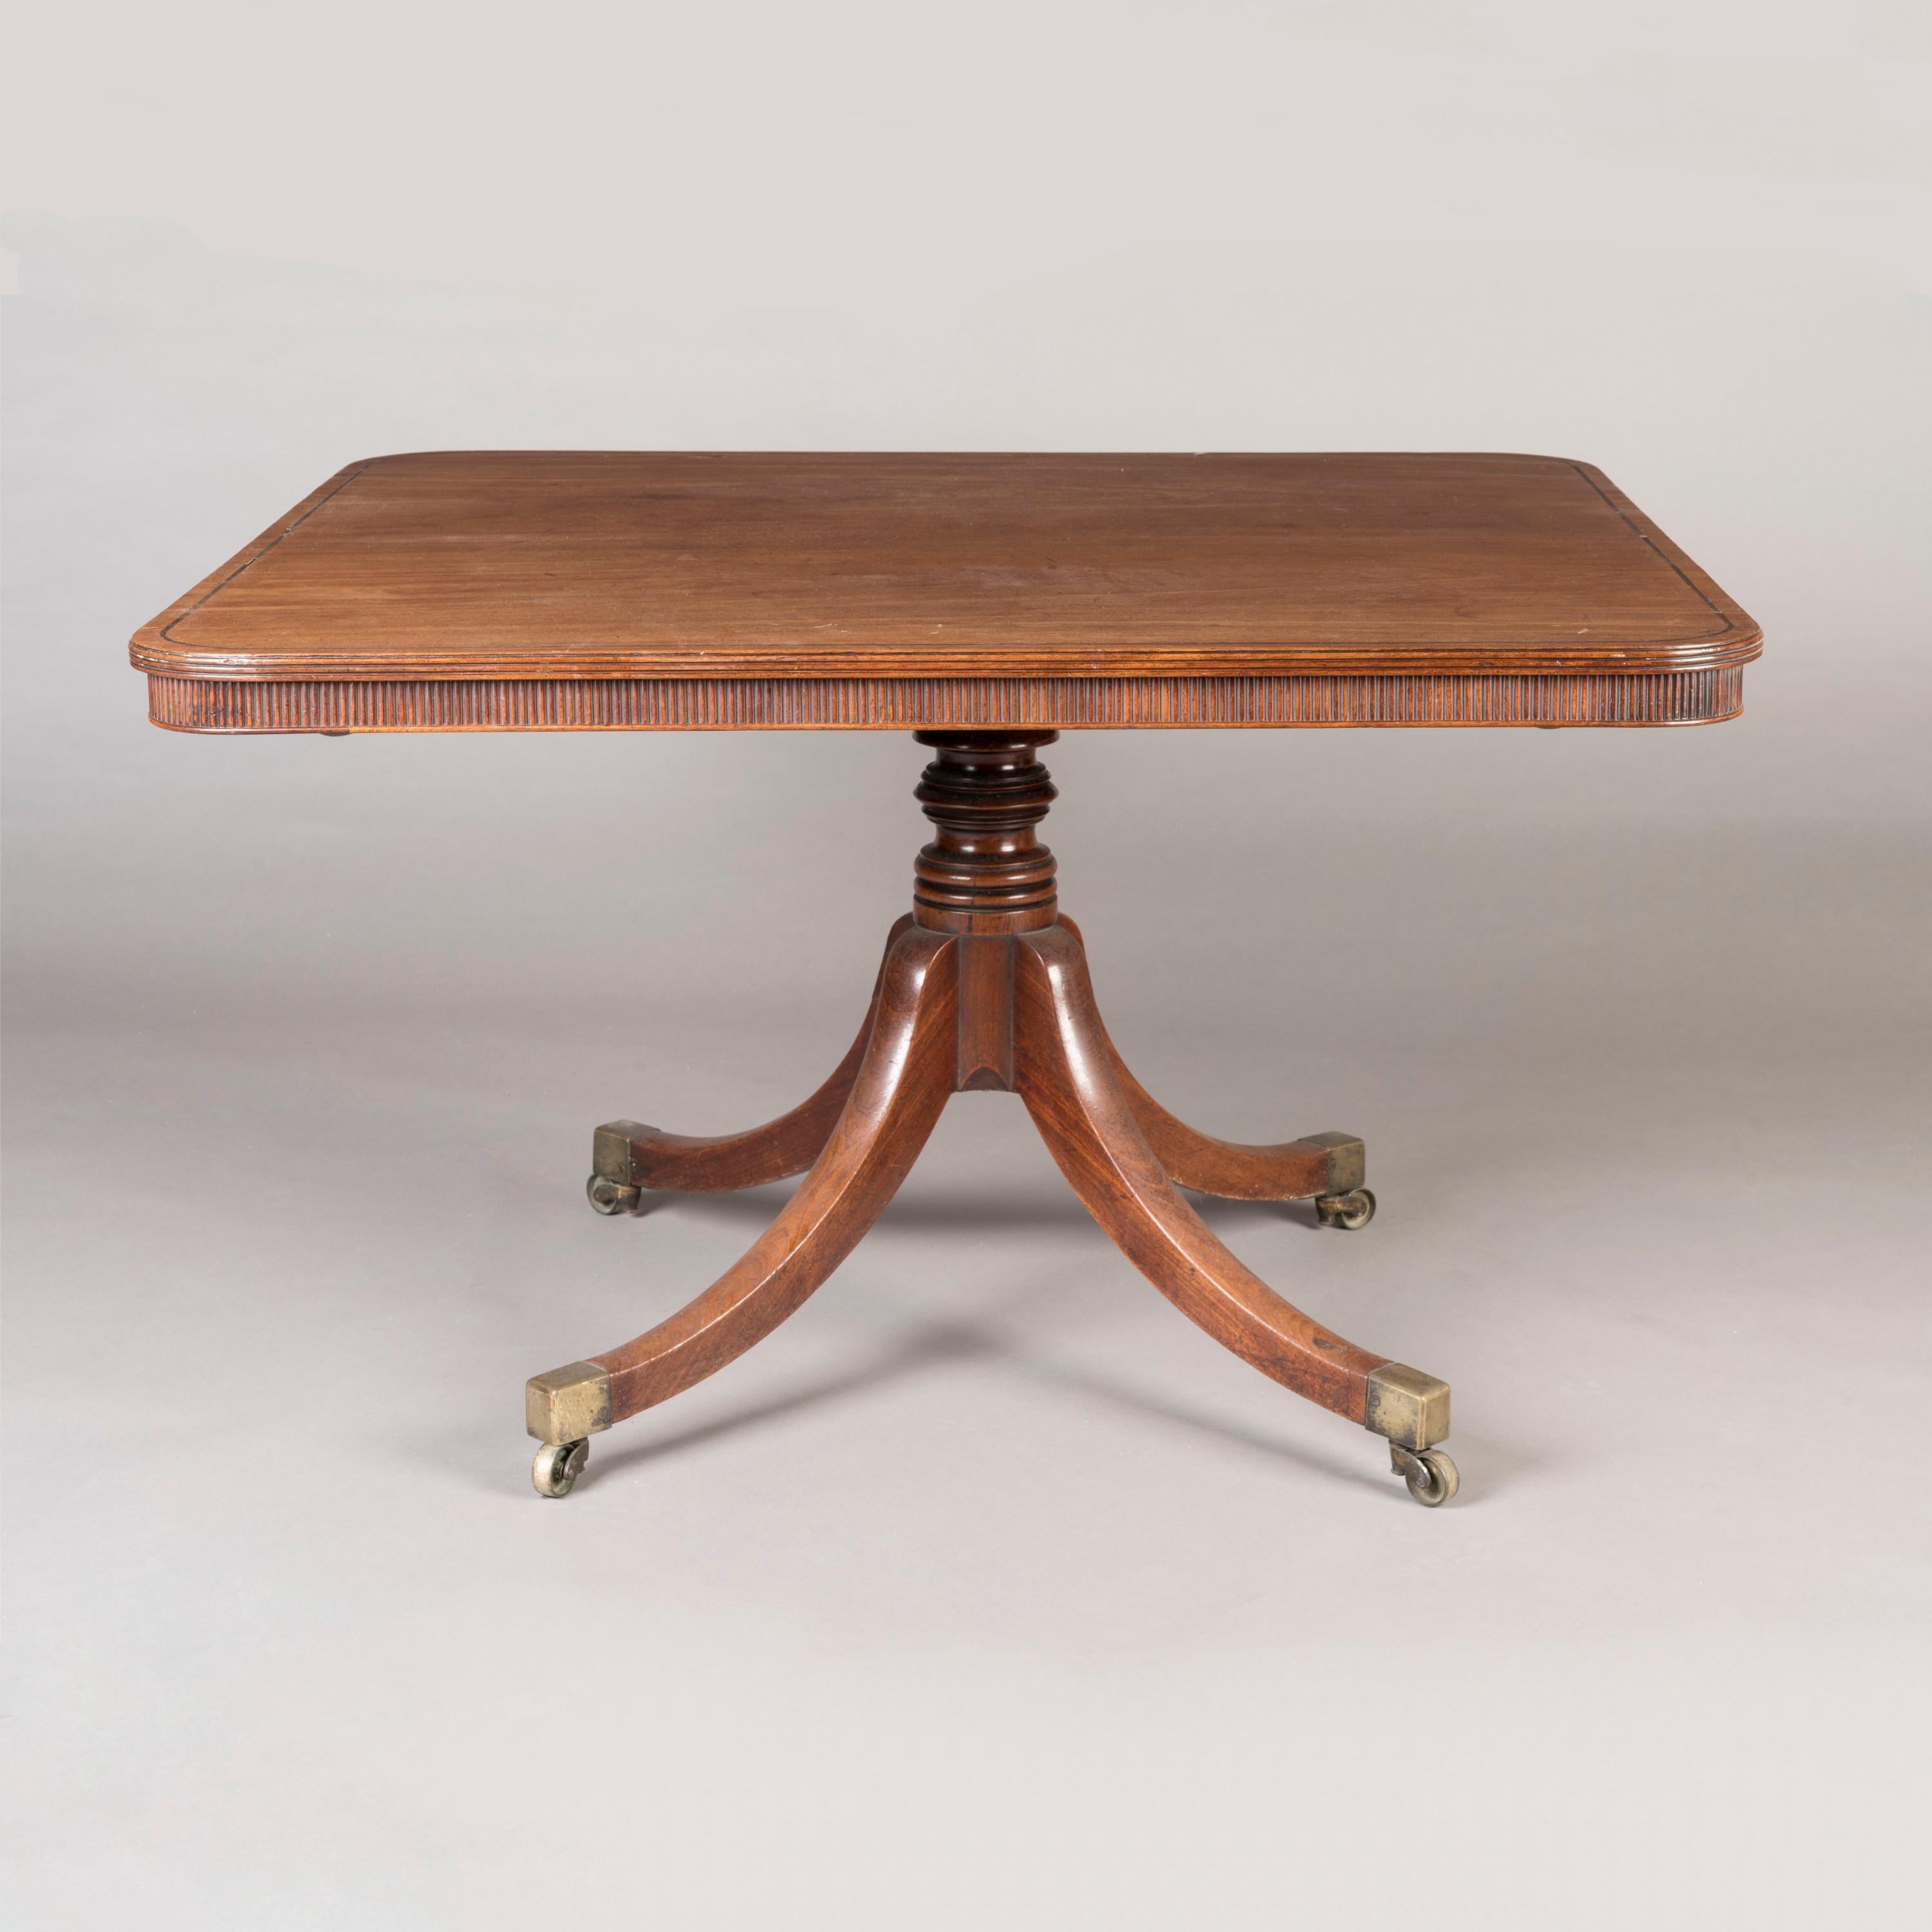 English An Early 19th Century George III Period Mahogany Table on Brass Castors For Sale